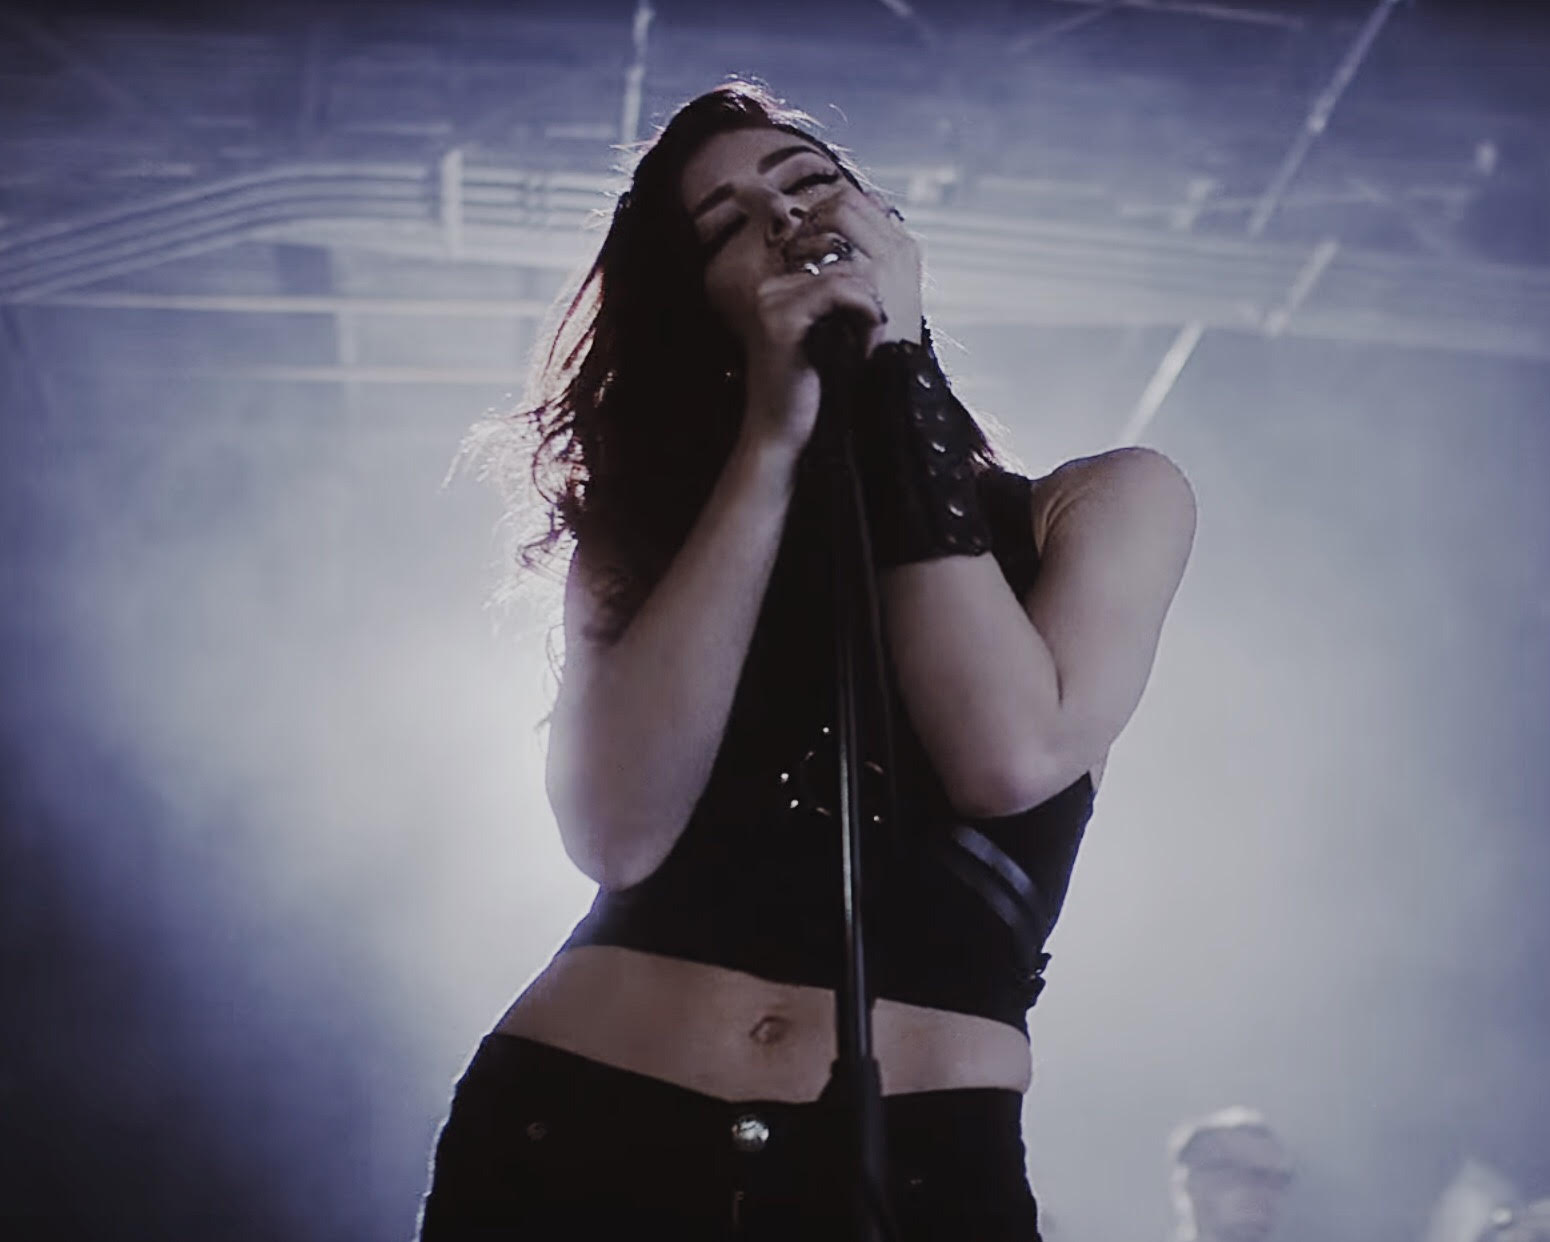 Chrissy Costanza of Against the Current wears JAKIMAC D-Ring Harness, Kingly Crown, and Warrior Cuff in "Talk" Music Video